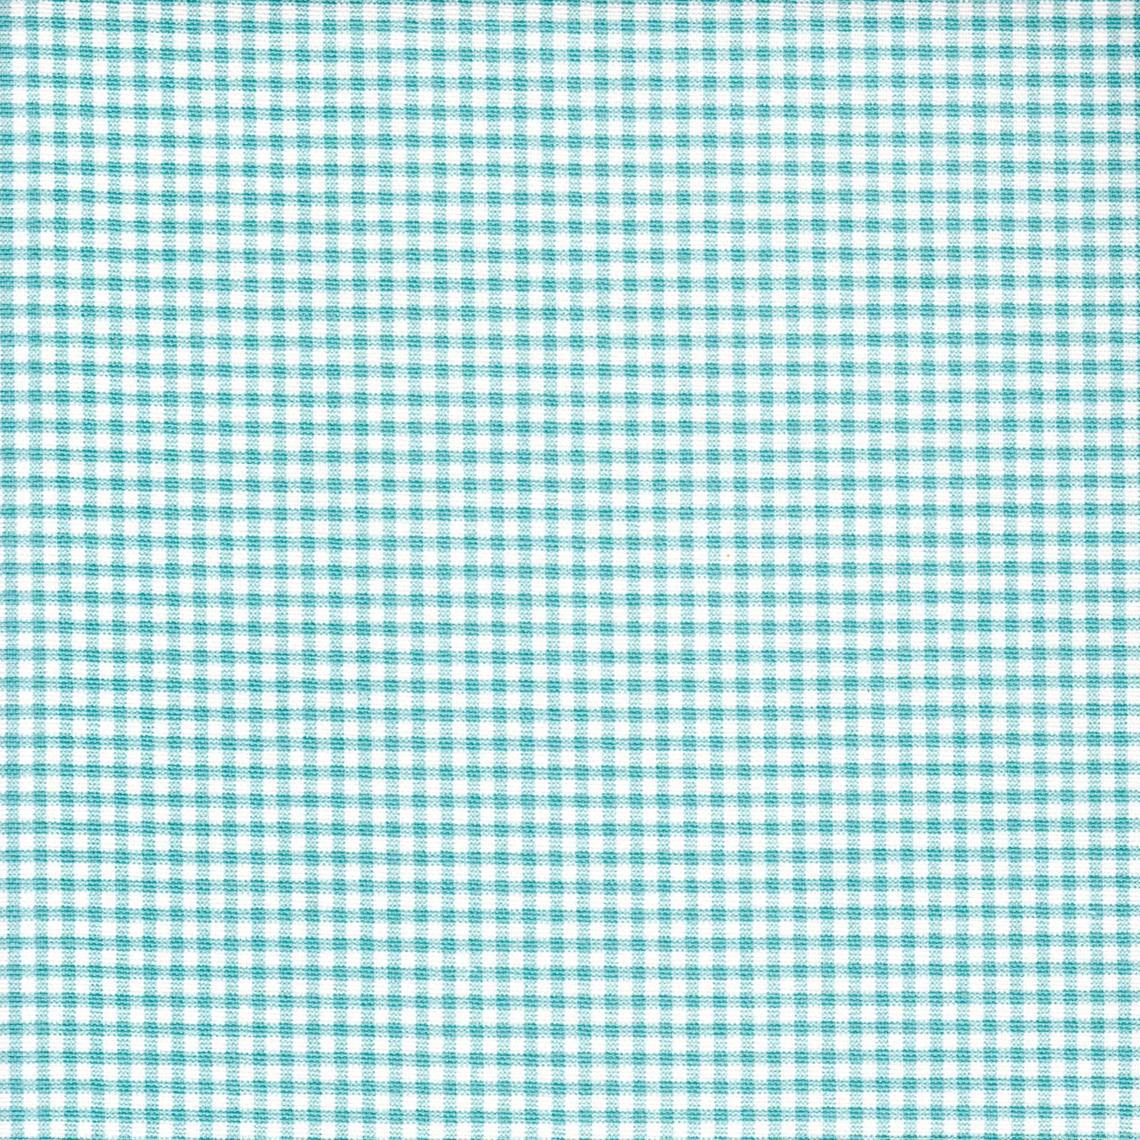 gathered crib skirt in farmhouse turquoise blue gingham check on cream